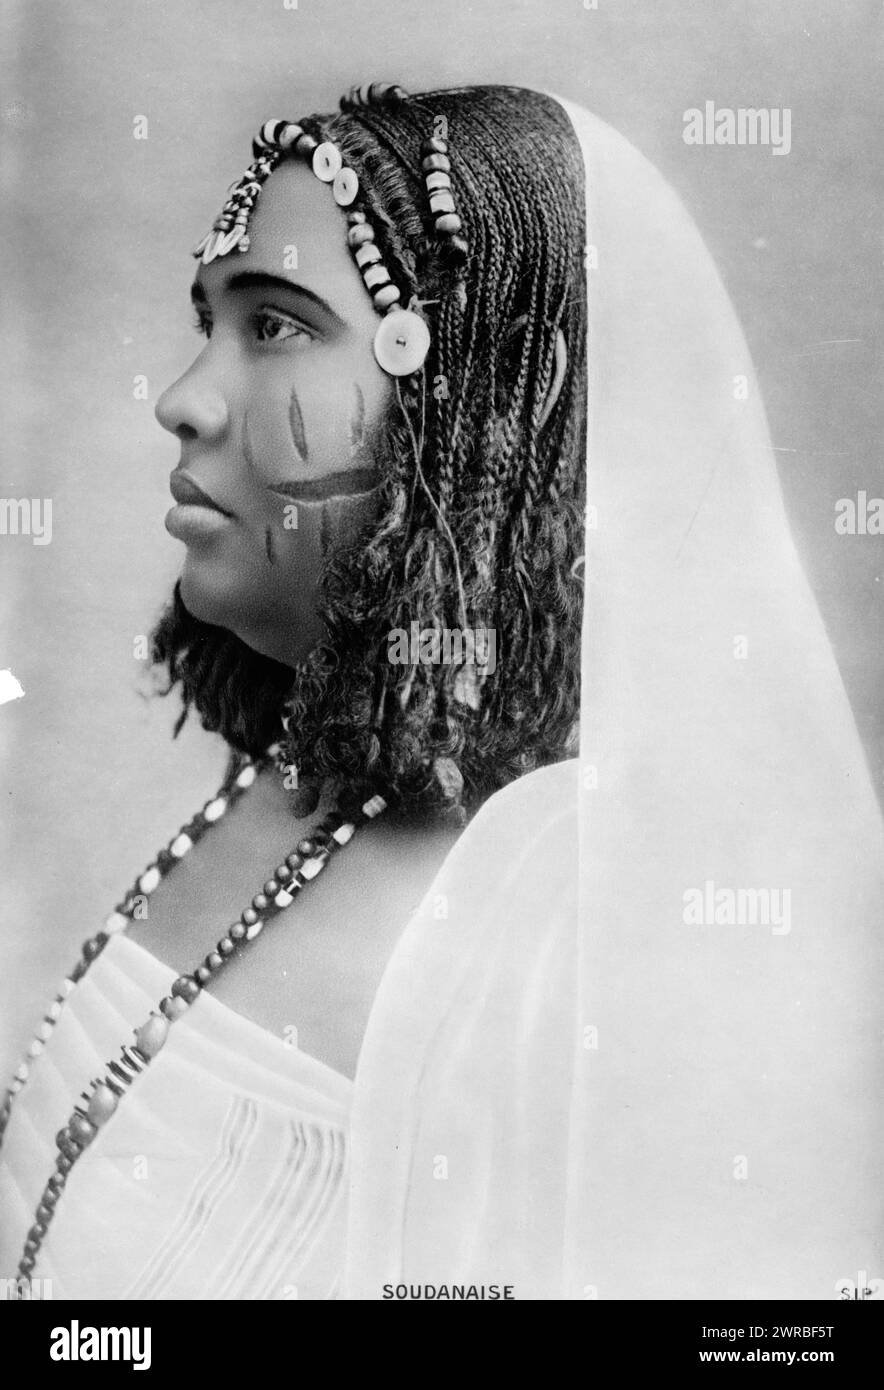 Sudanese woman, Photo shows a Sudanese woman, head and shoulders portrait, left profile., Carpenter, Frank G. (Frank George), 1855-1924, collector, between 1890 and 1923, Women, Clothing & dress, Sudan, 1890-1930, Photographic prints, 1890-1930., Photographic prints, 1890-1930, 1 photographic print Stock Photo